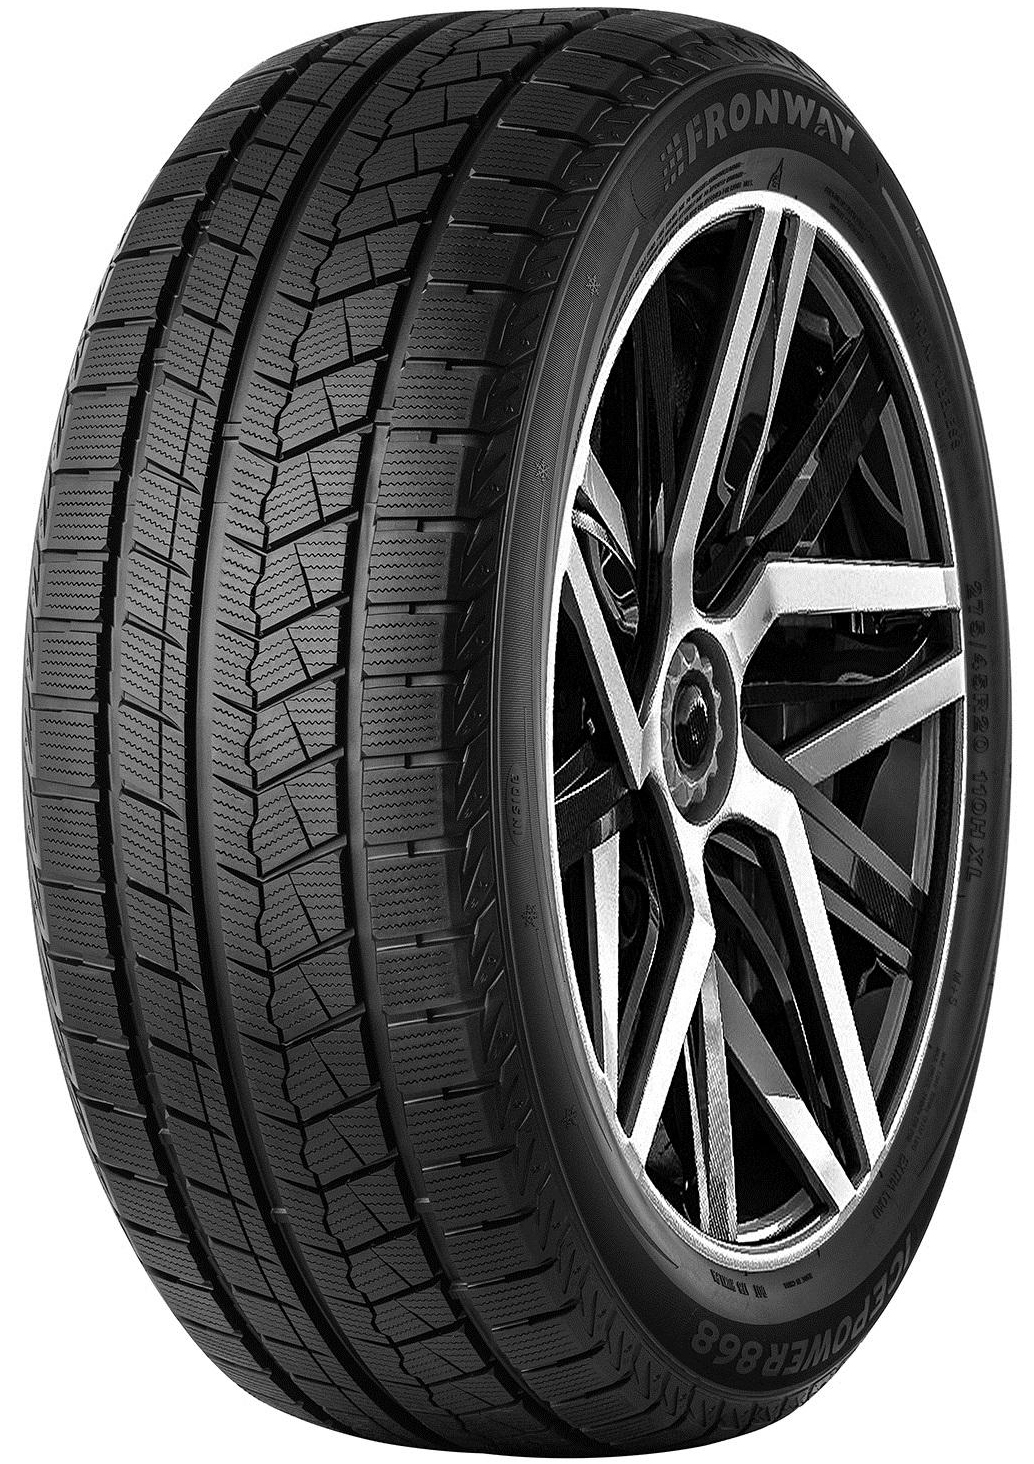    Fronway Icepower 868 255/55 R18 